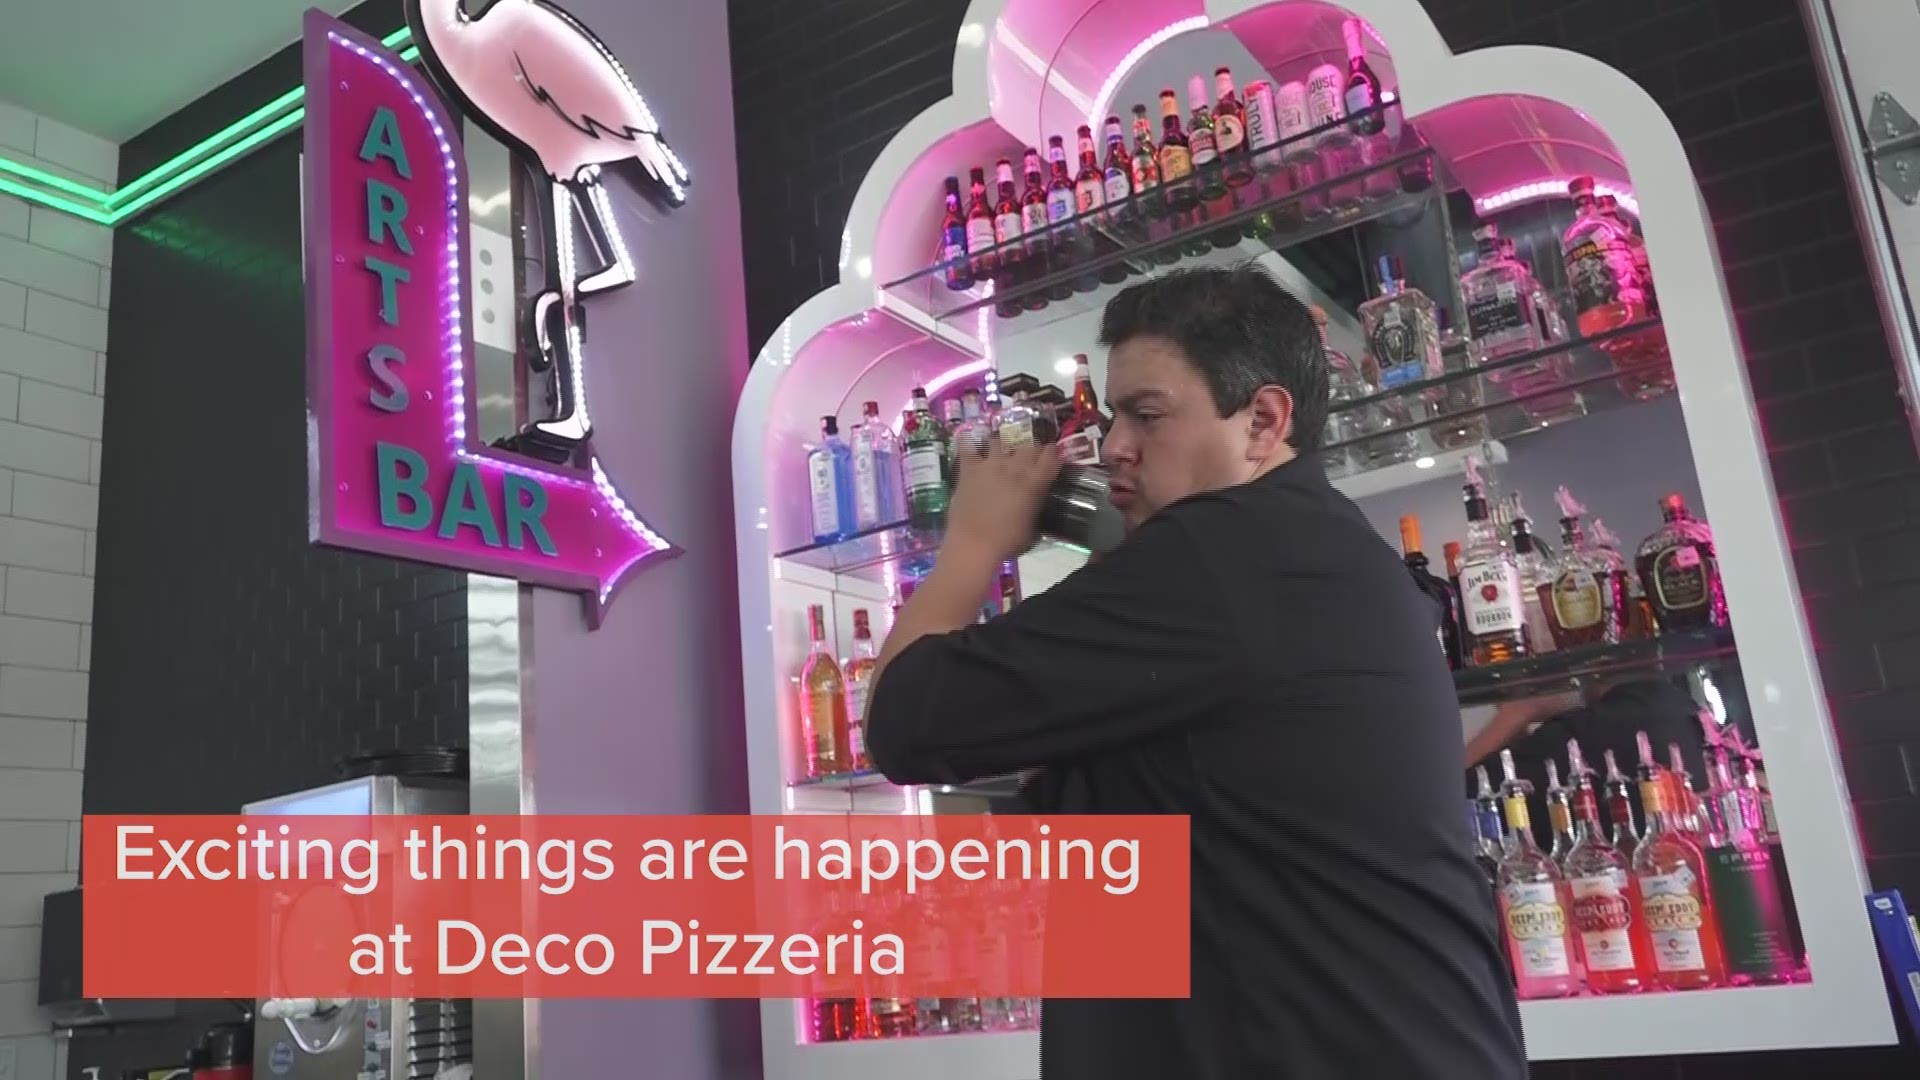 The vibrant colors and neon lights of Deco Pizzeria brings some Miami flavor to the busy Medical Center area.